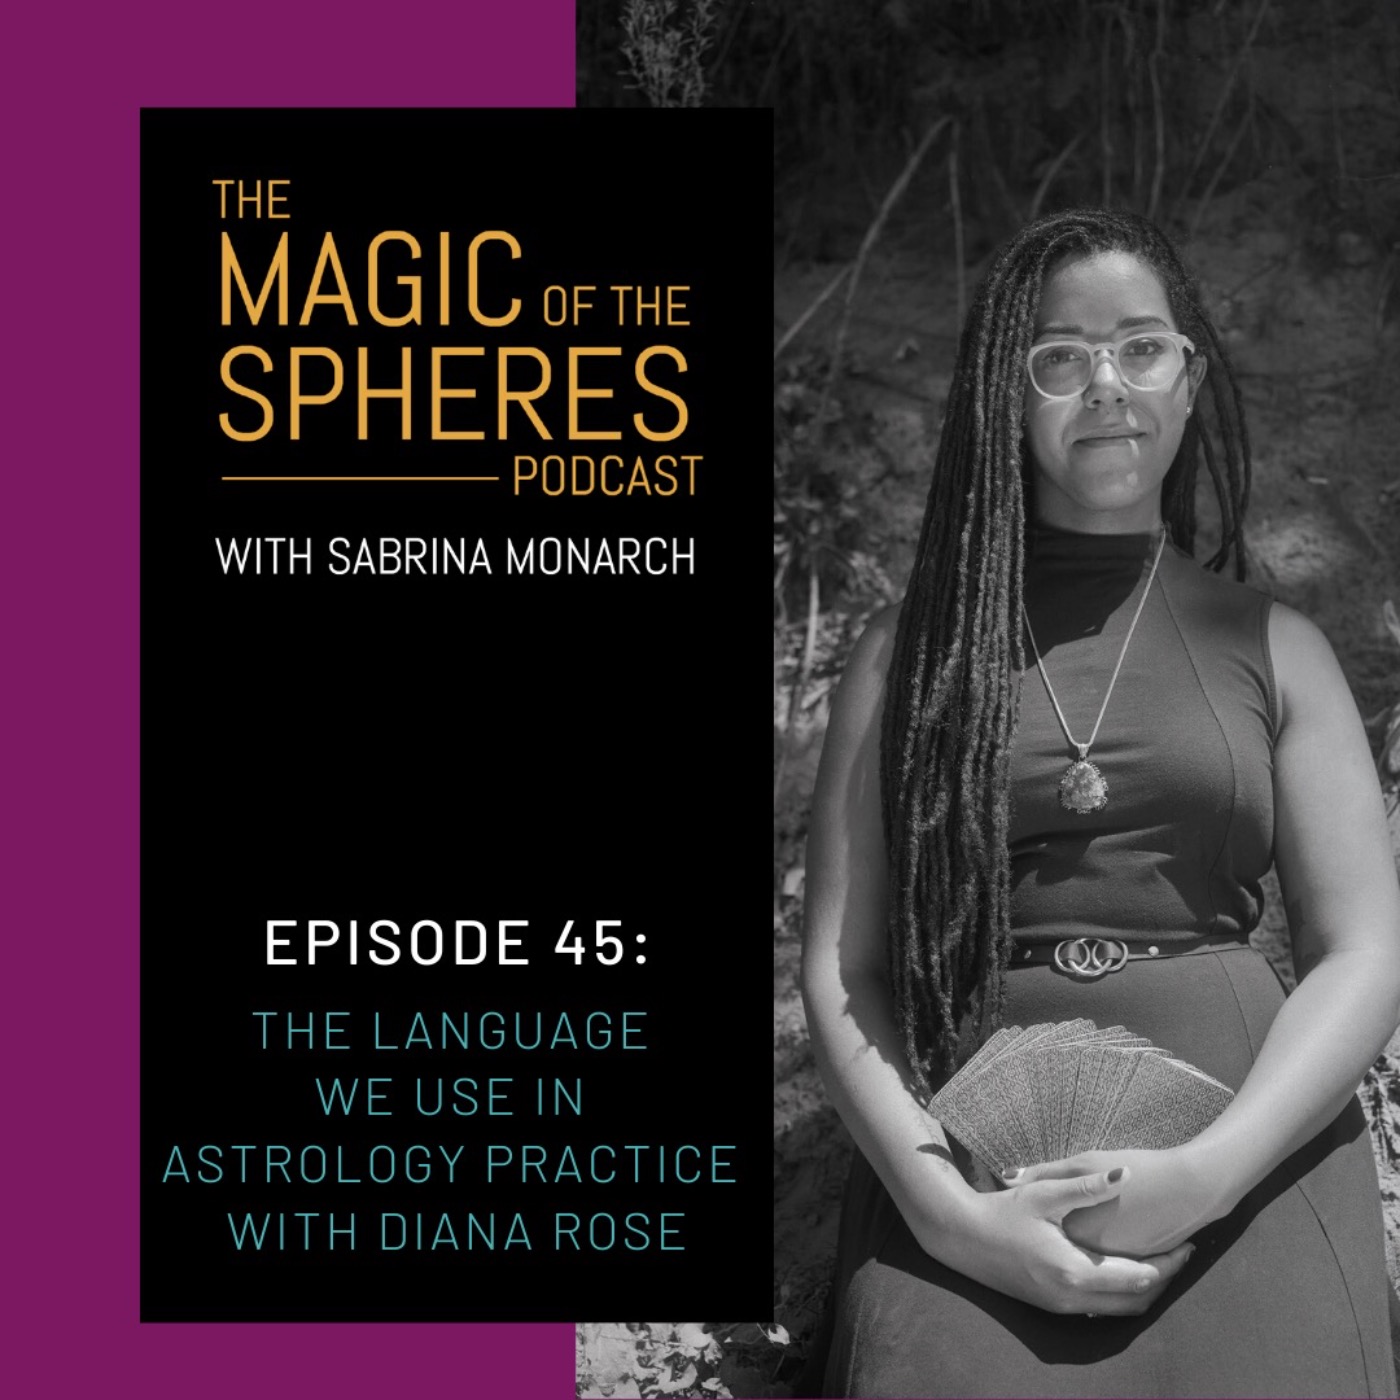 The Language we Use in Astrology Practice with Diana Rose